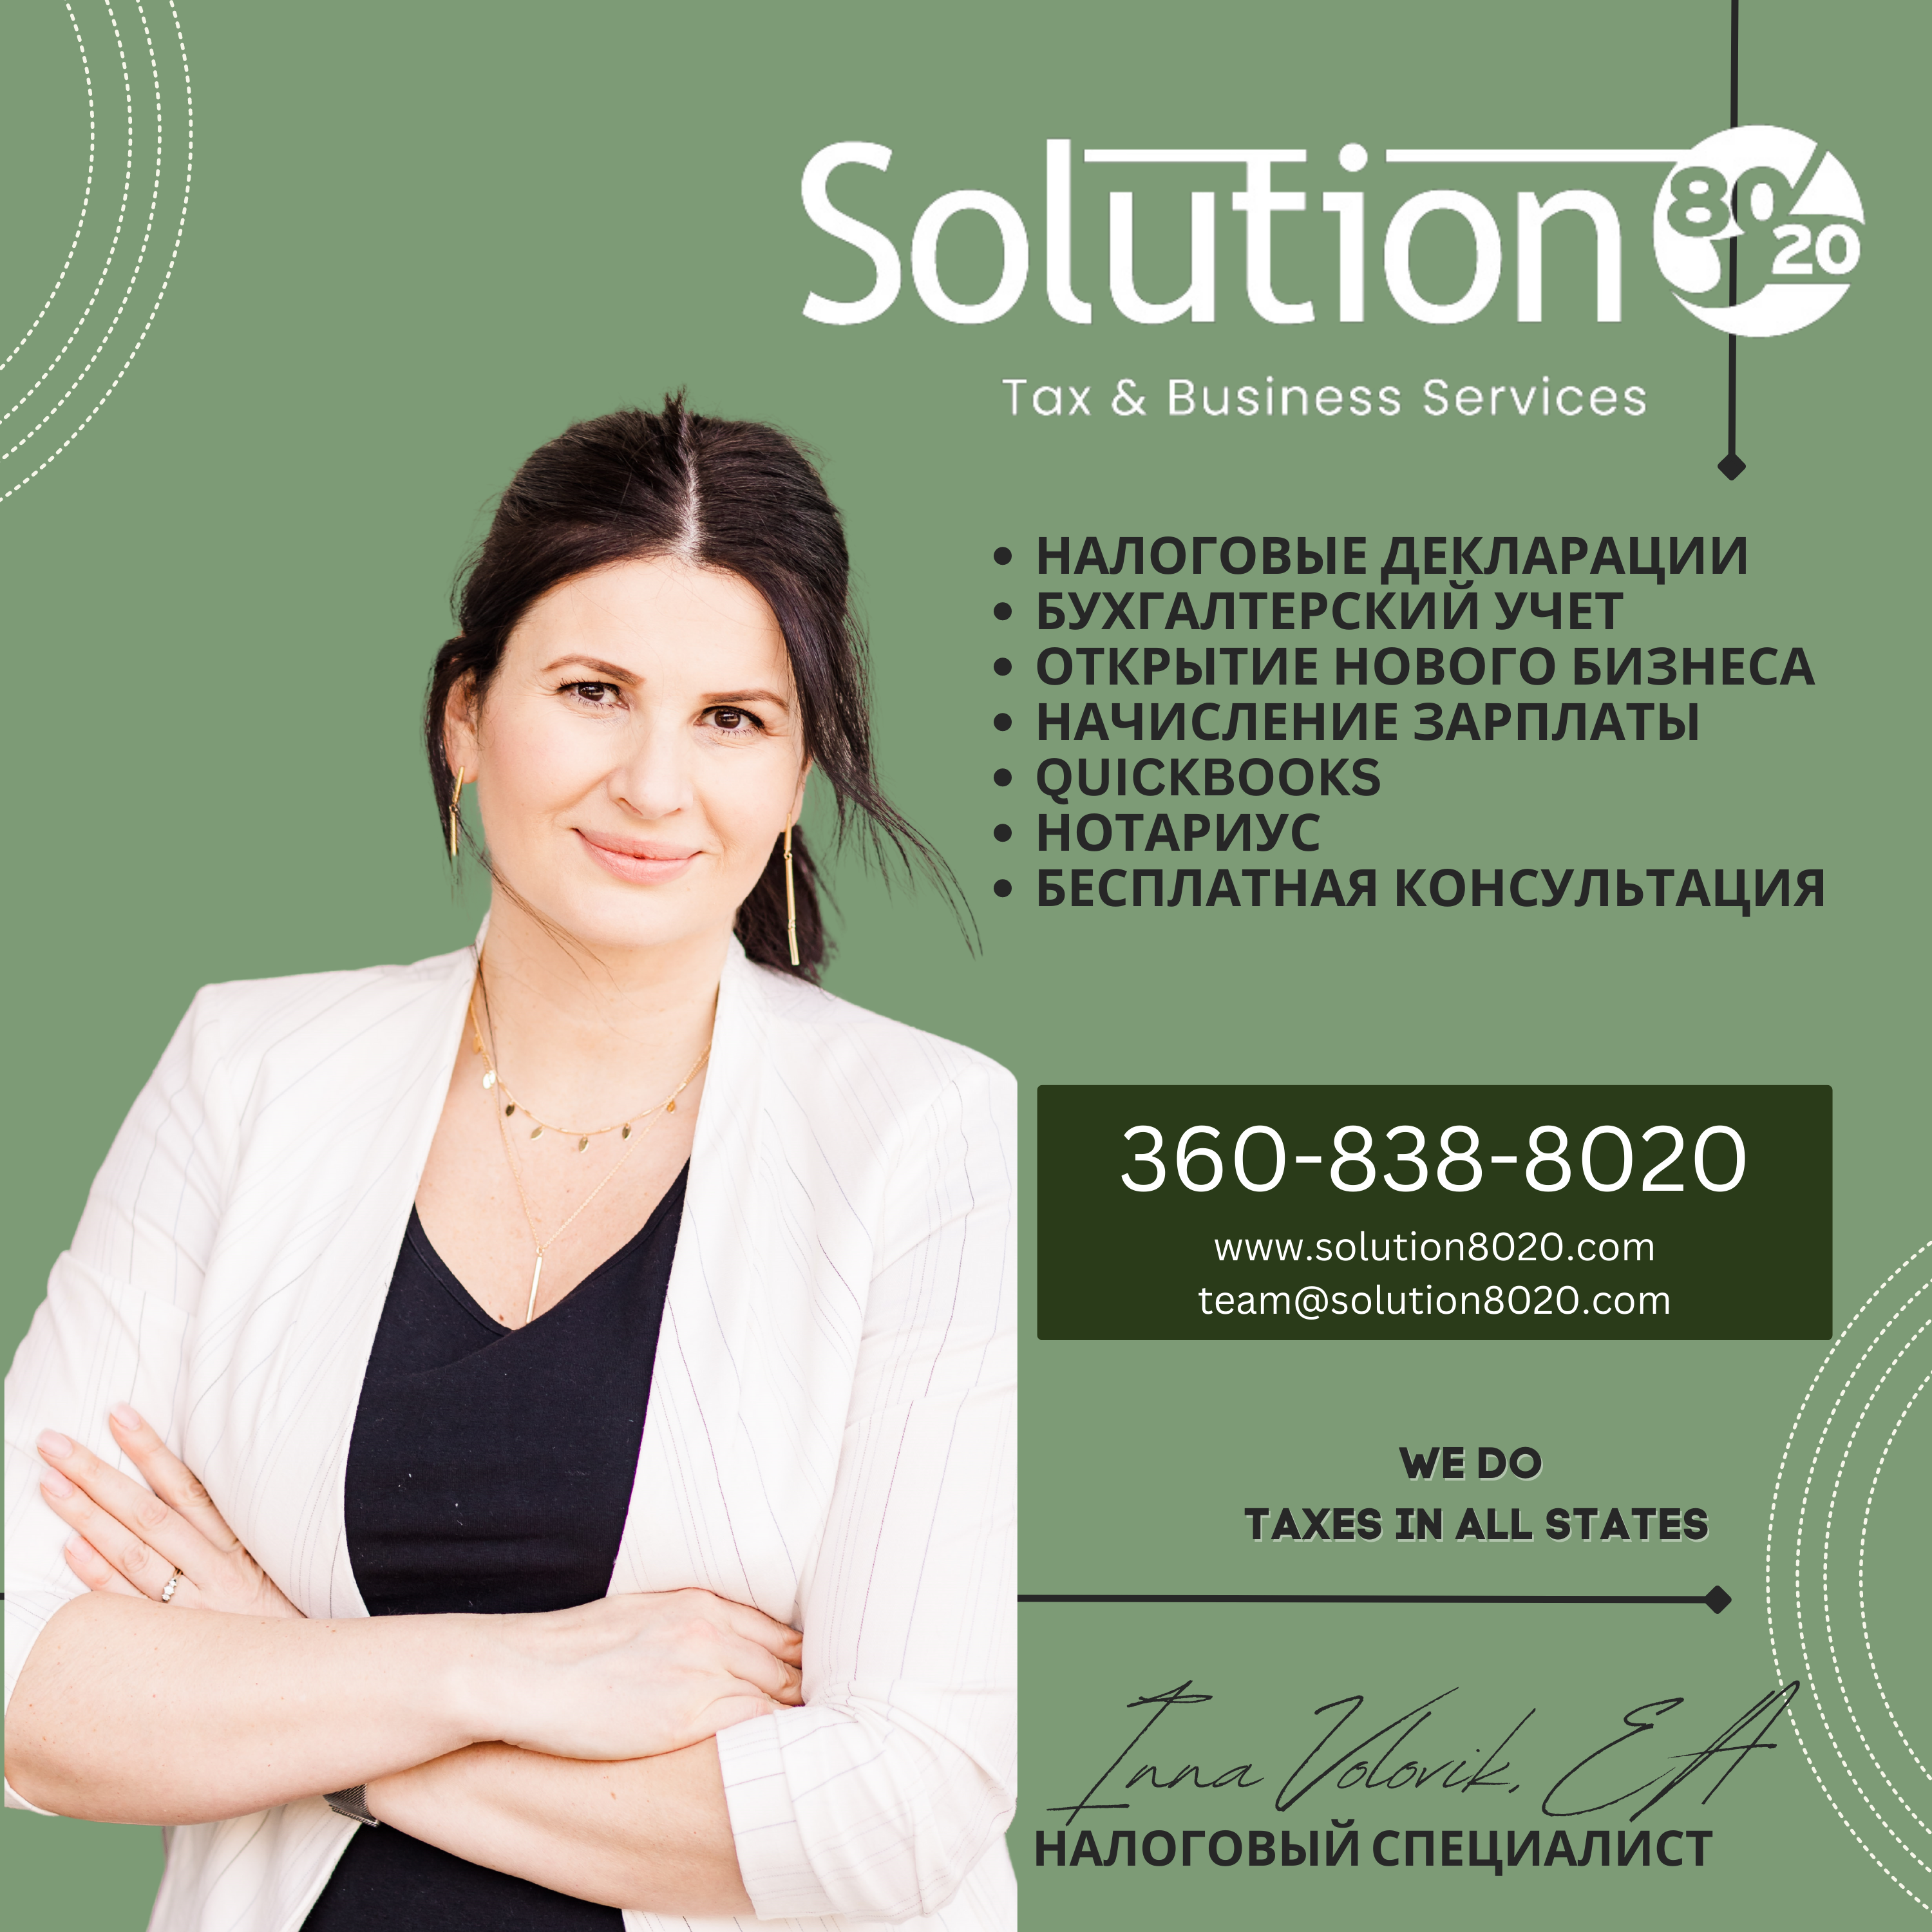 Solution 8020 LLC Tax & Business Services